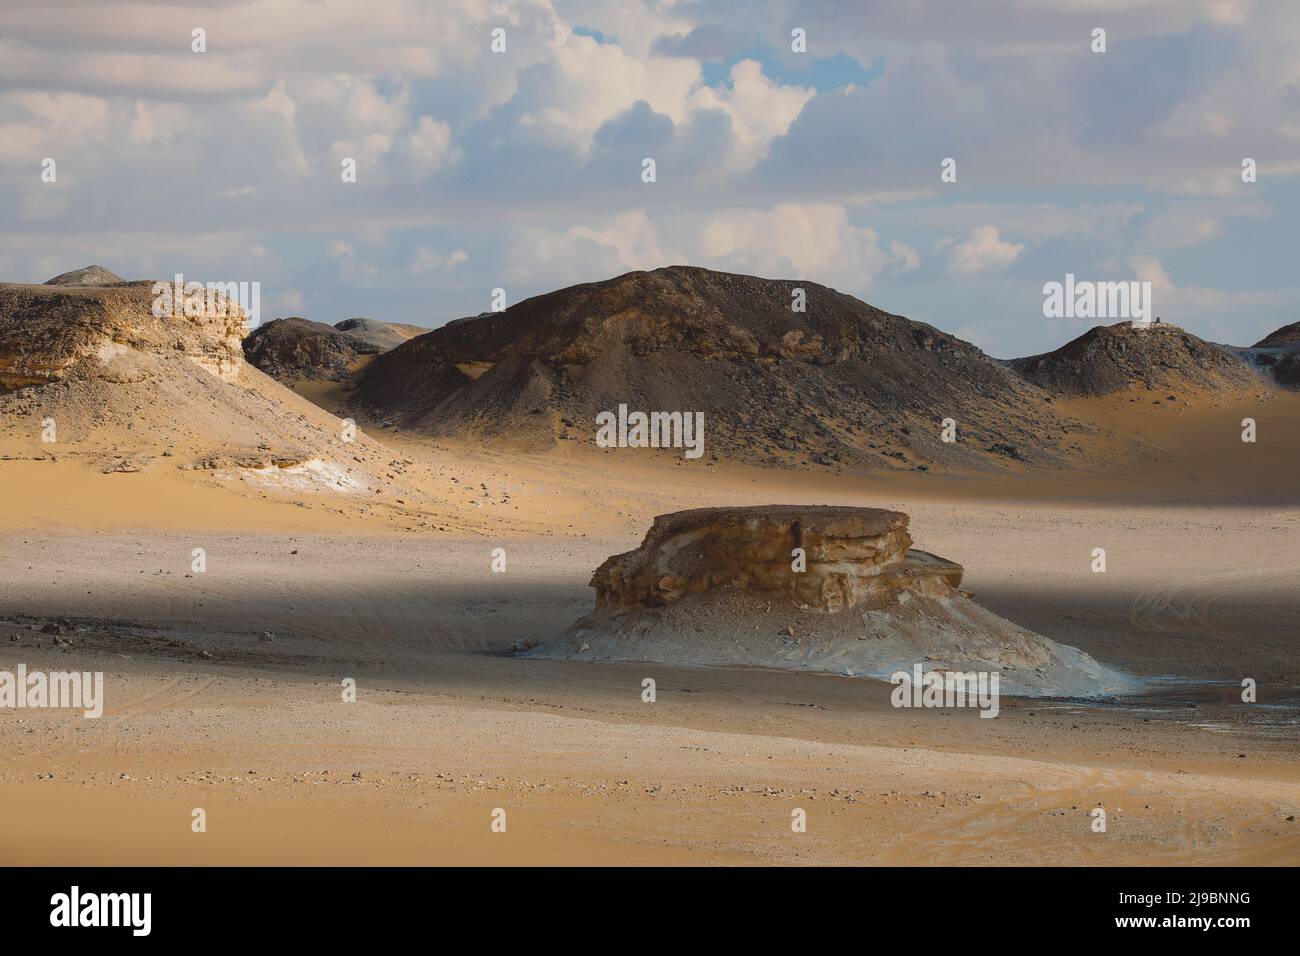 Panoramic View to the Sandy Hills in the Black Desert, is National park in the Farafra Oasis, Egypt Stock Photo